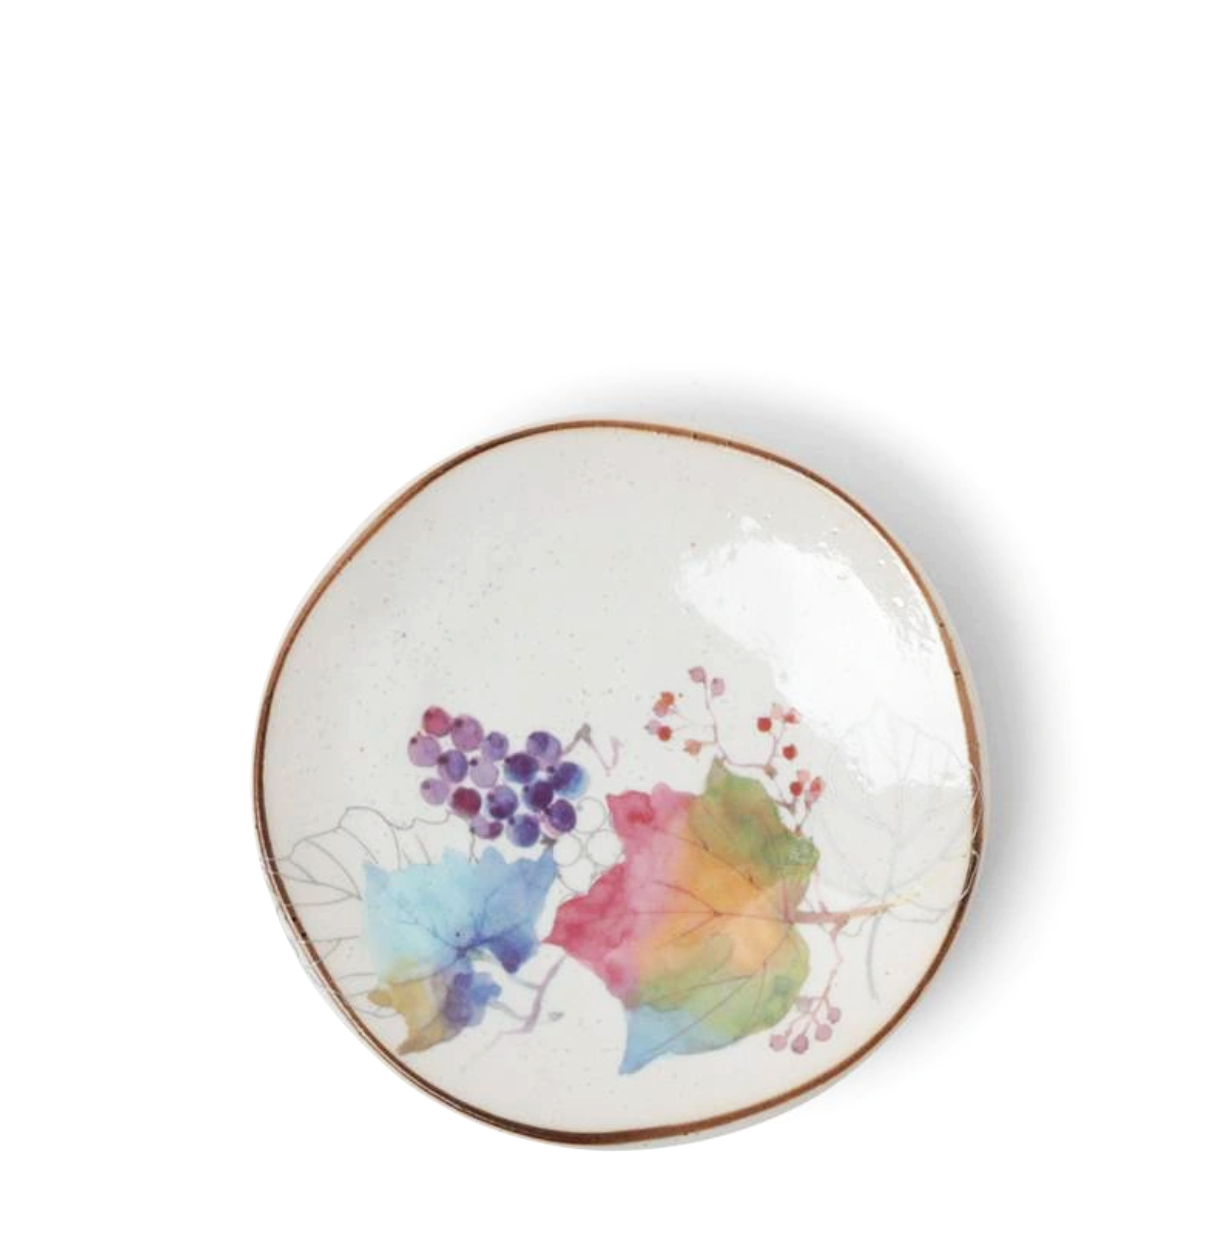 Floral Bloom Small Plates